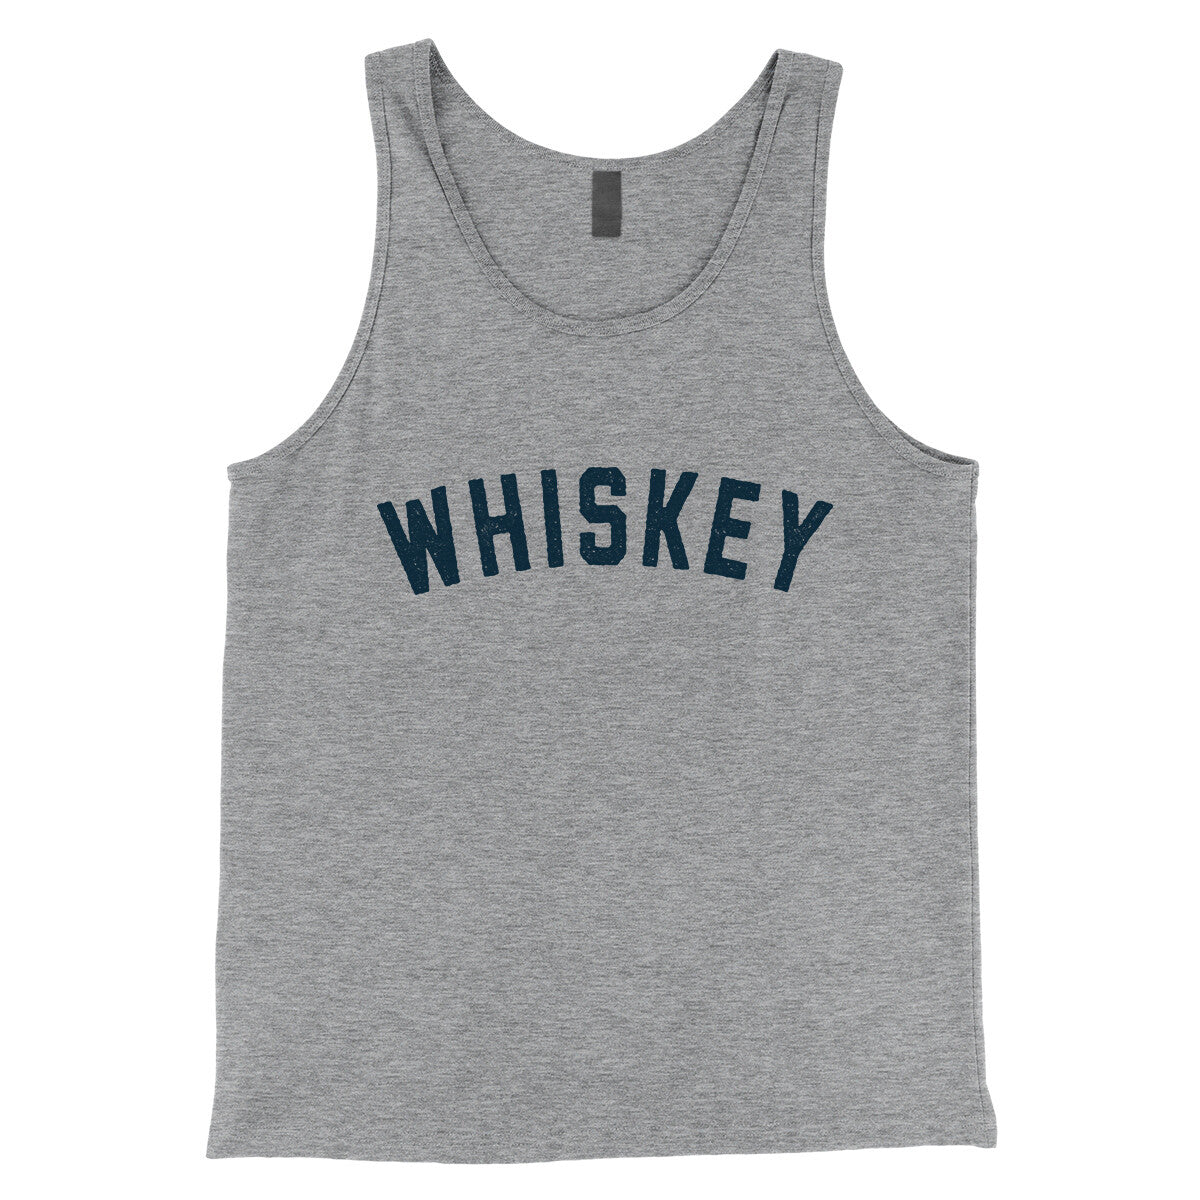 Whiskey in Athletic Heather Color